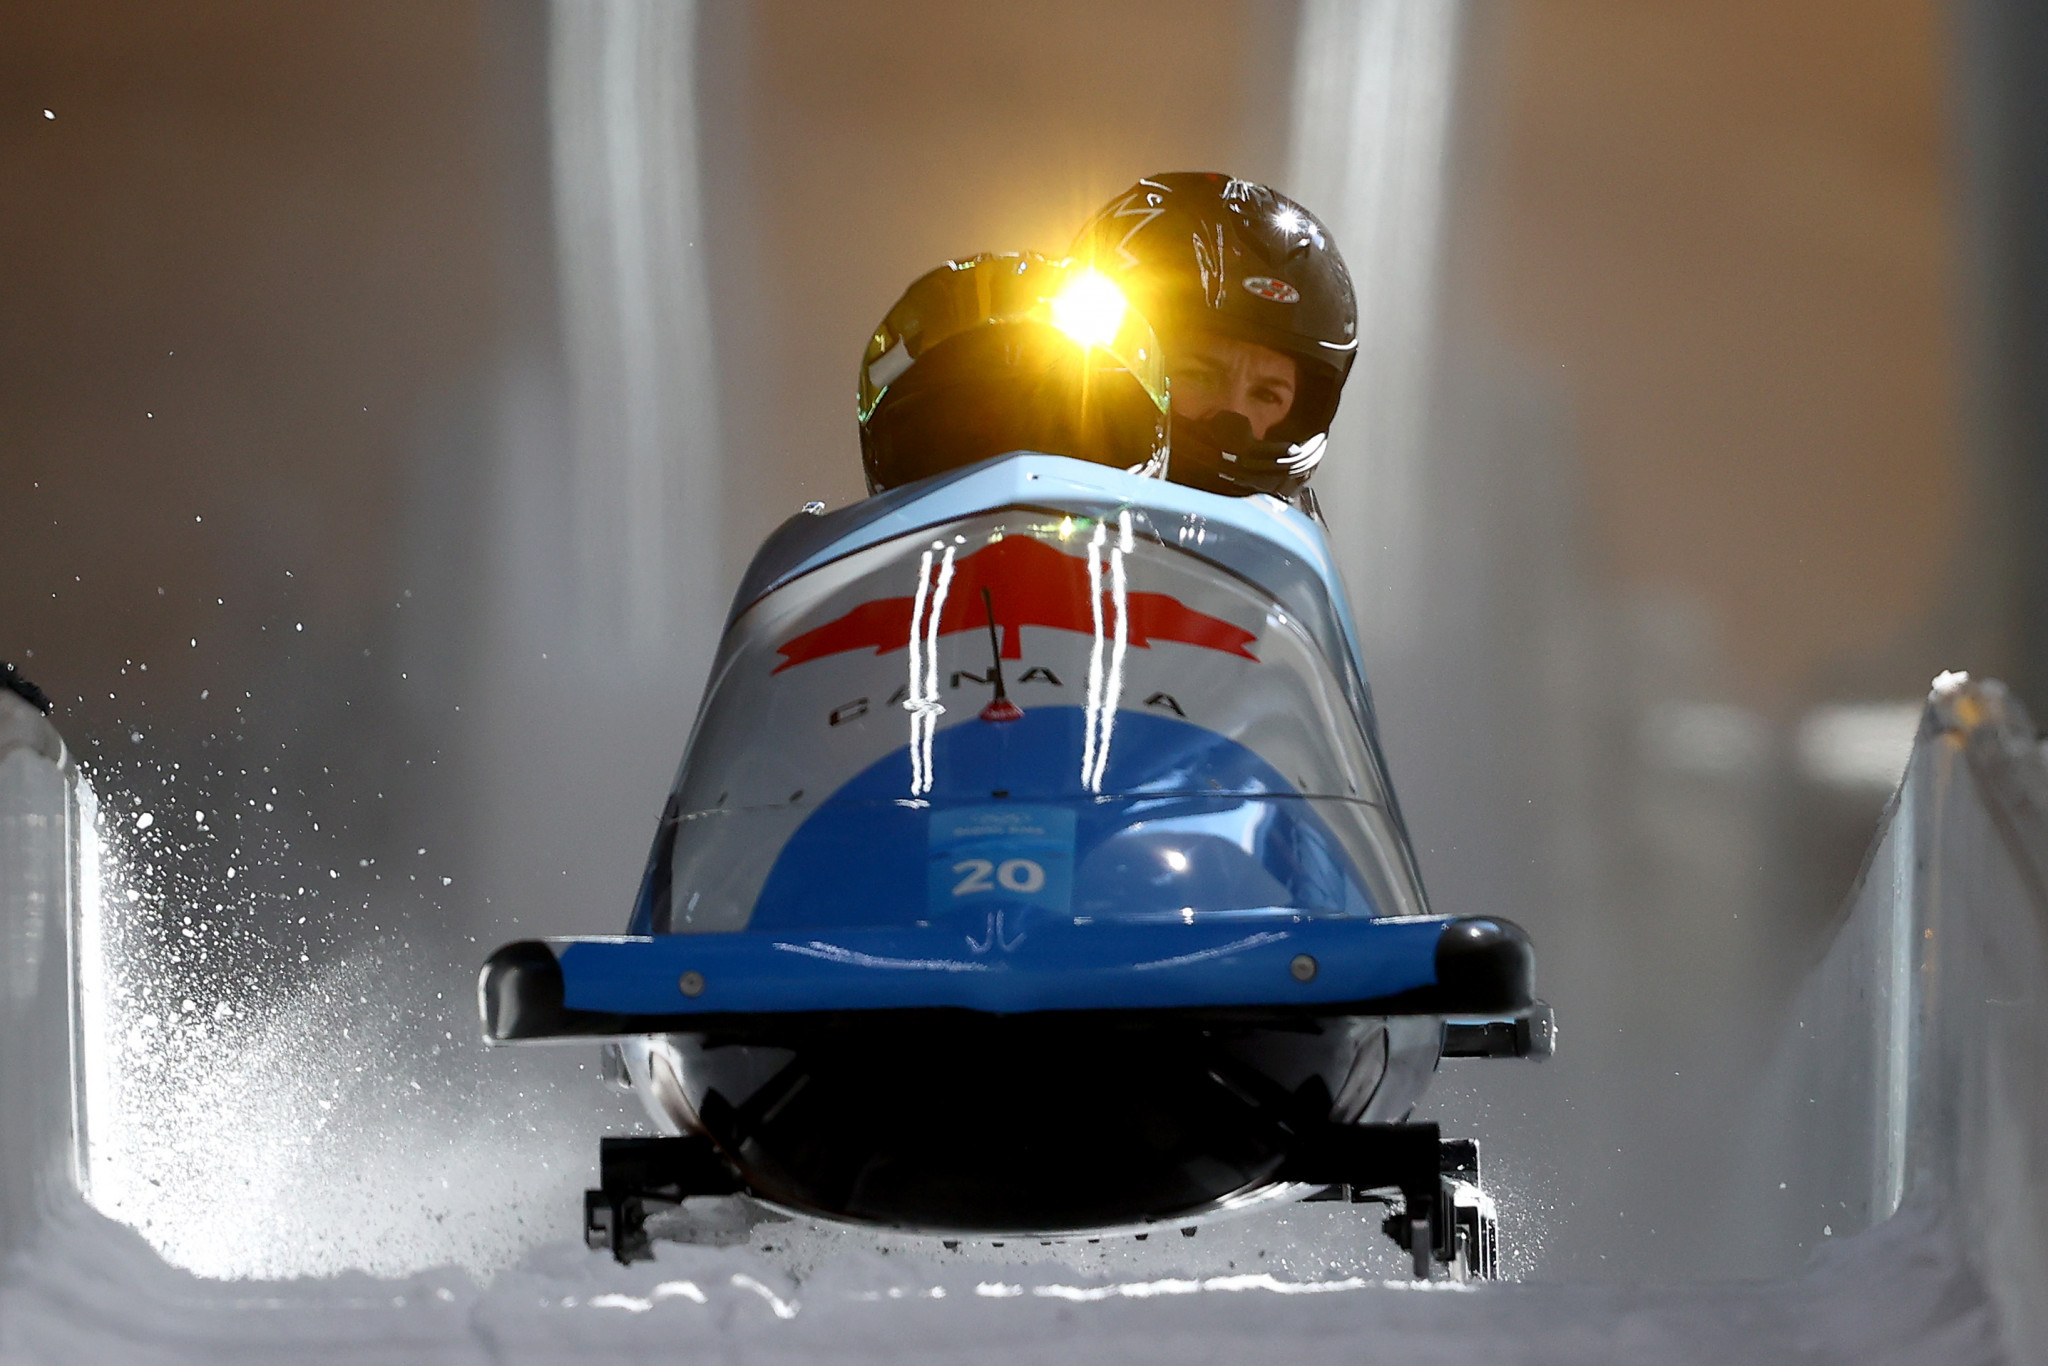 Athletes have called for resignations in an open letter slamming a "toxic" culture within Bobsleigh Canada Skeleton ©Getty Images